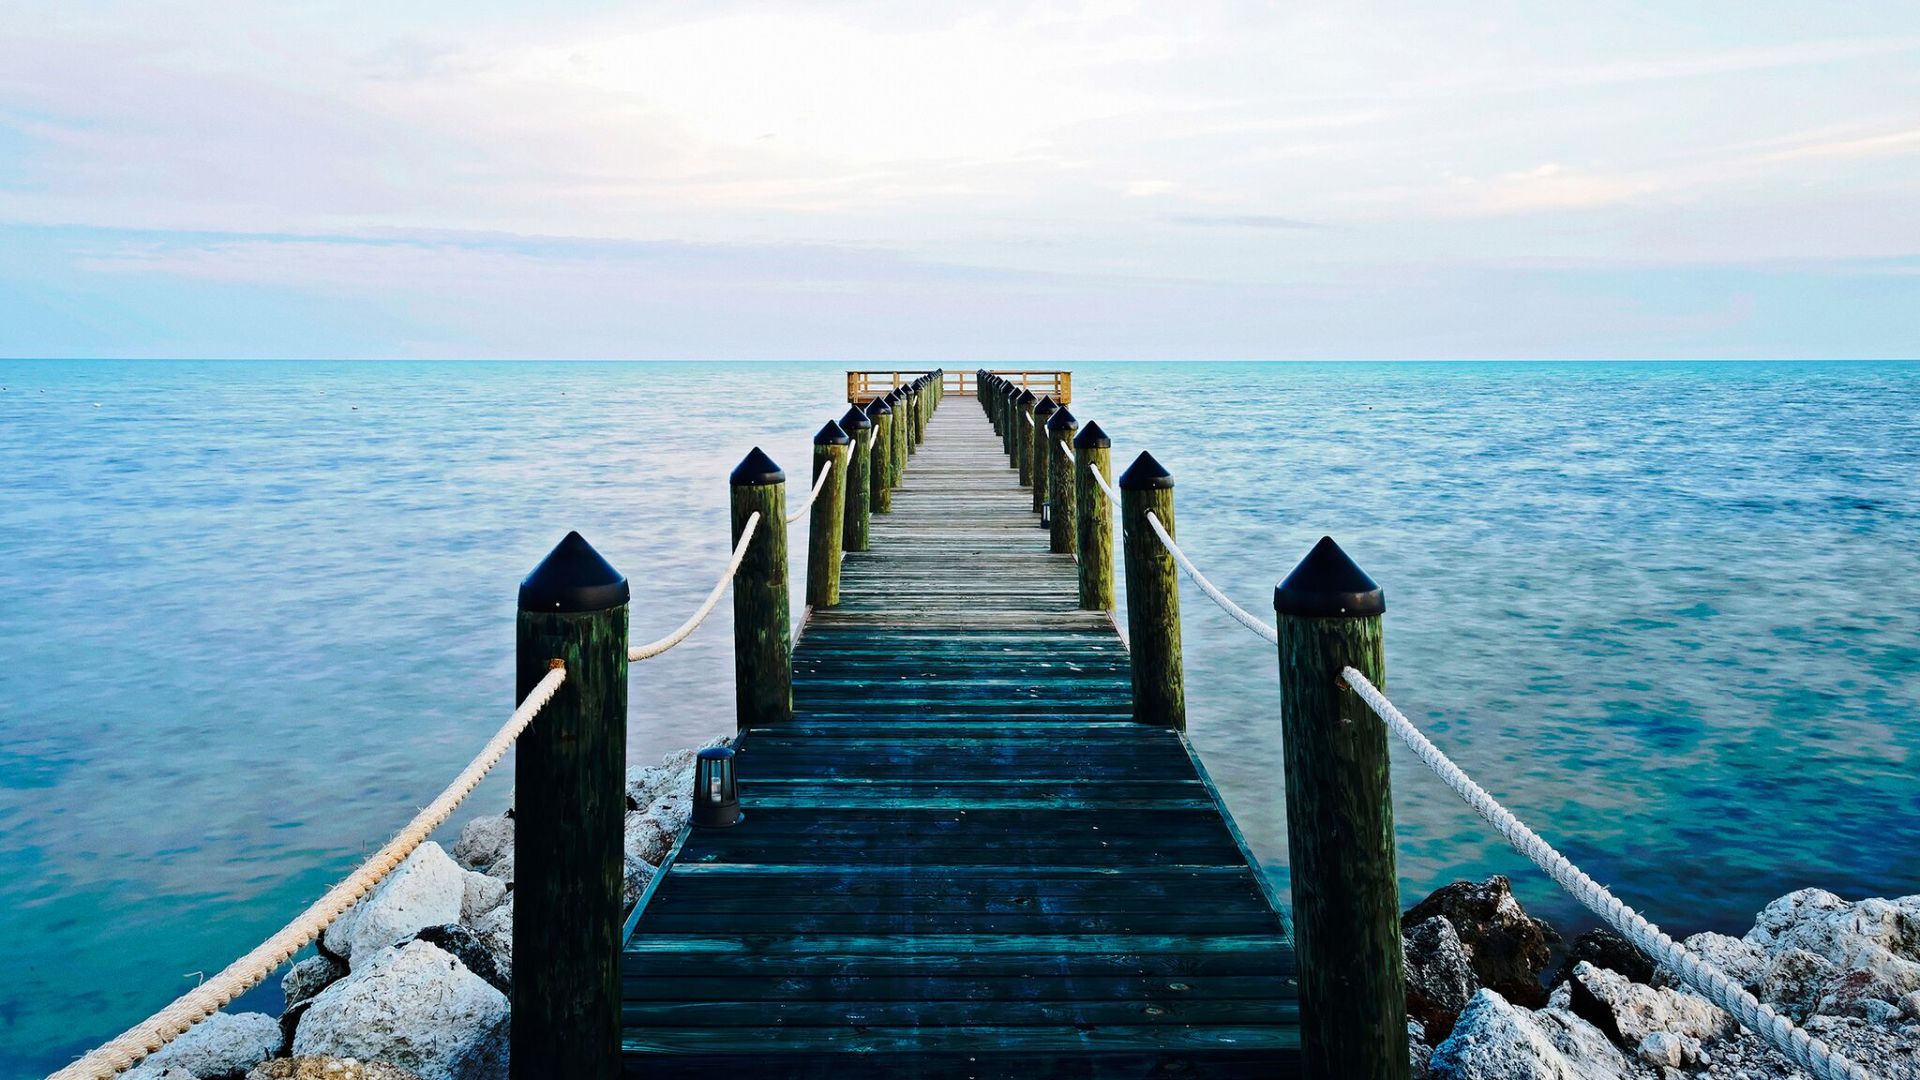 A Wooden Pier Next To A Body Of Water